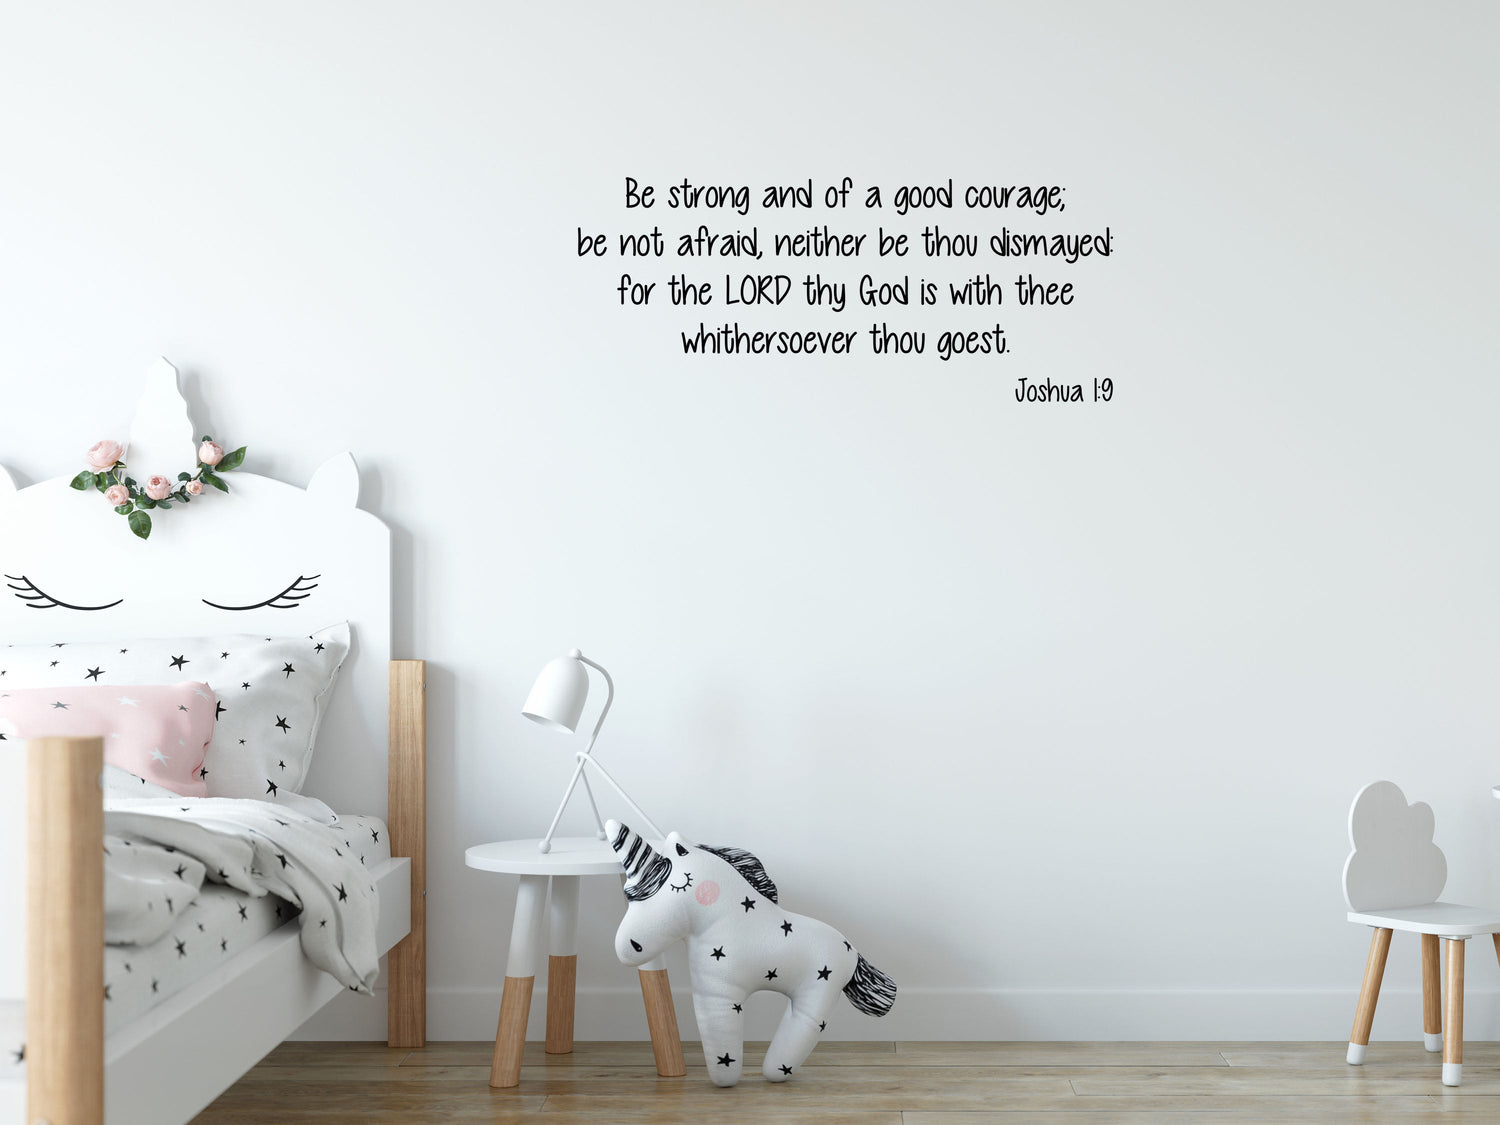 Joshua 1:9 - Bible Wall Quote Sticker Vinyl Wall Decal Inspirational Wall Signs 